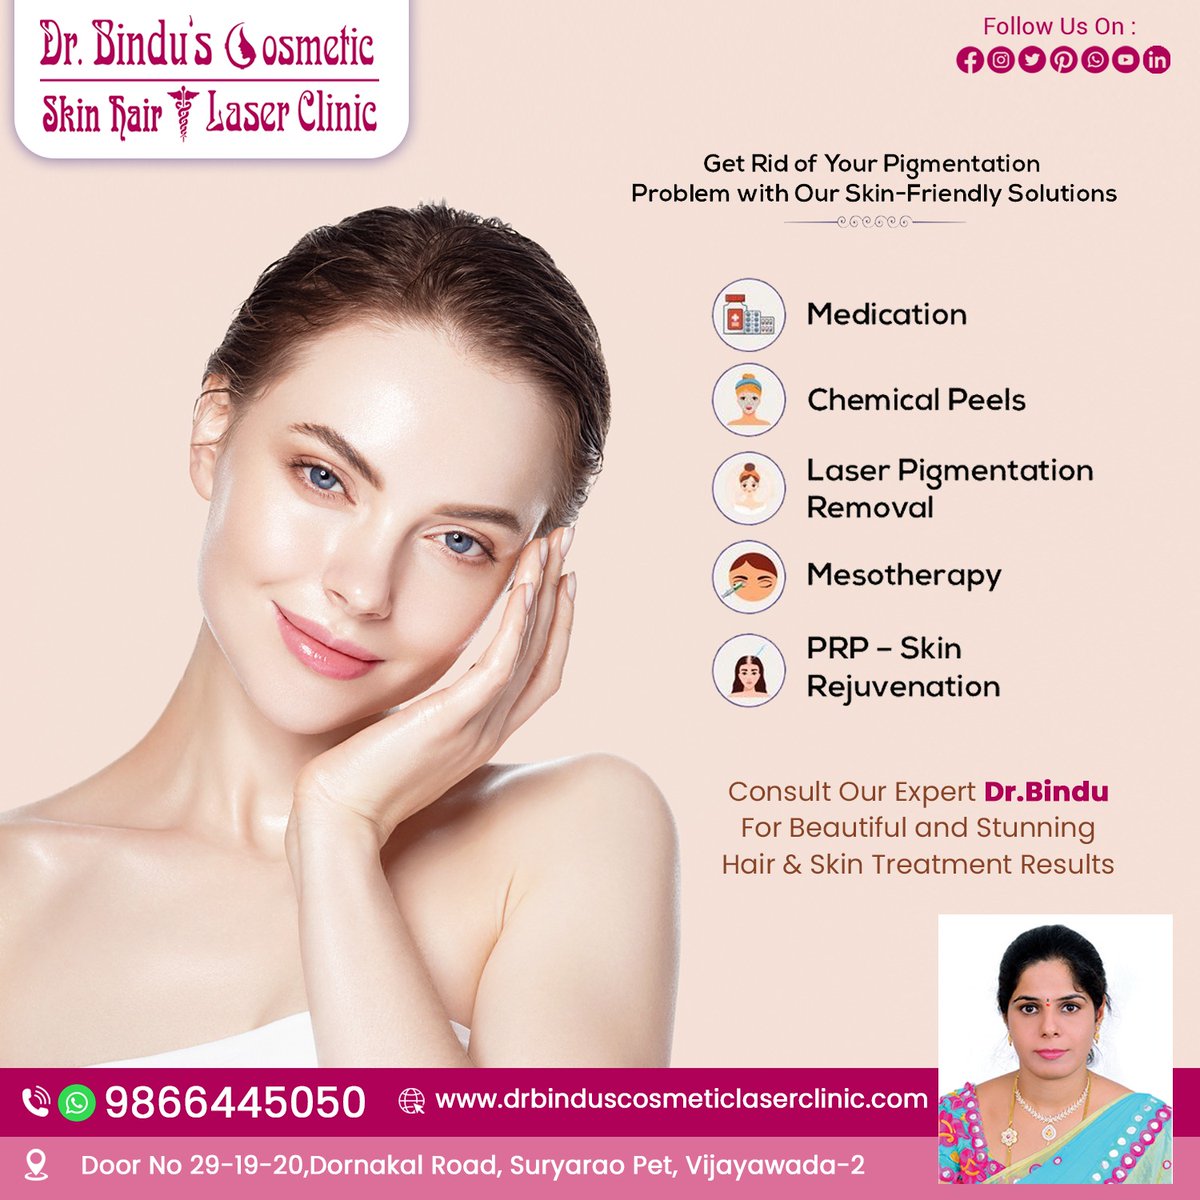 Get Rid of Your Pigmentation Problem with Our Skin-Friendly Solutions!

#binduclinic #laserclinic #binduclinicinvijayawada #binducosmeticlasercliinic #medication #chemicalpeels #laserpigmentremoval #mesotherapy #prpskin #laserclinic #ageless #antiaging #antiagingskincare